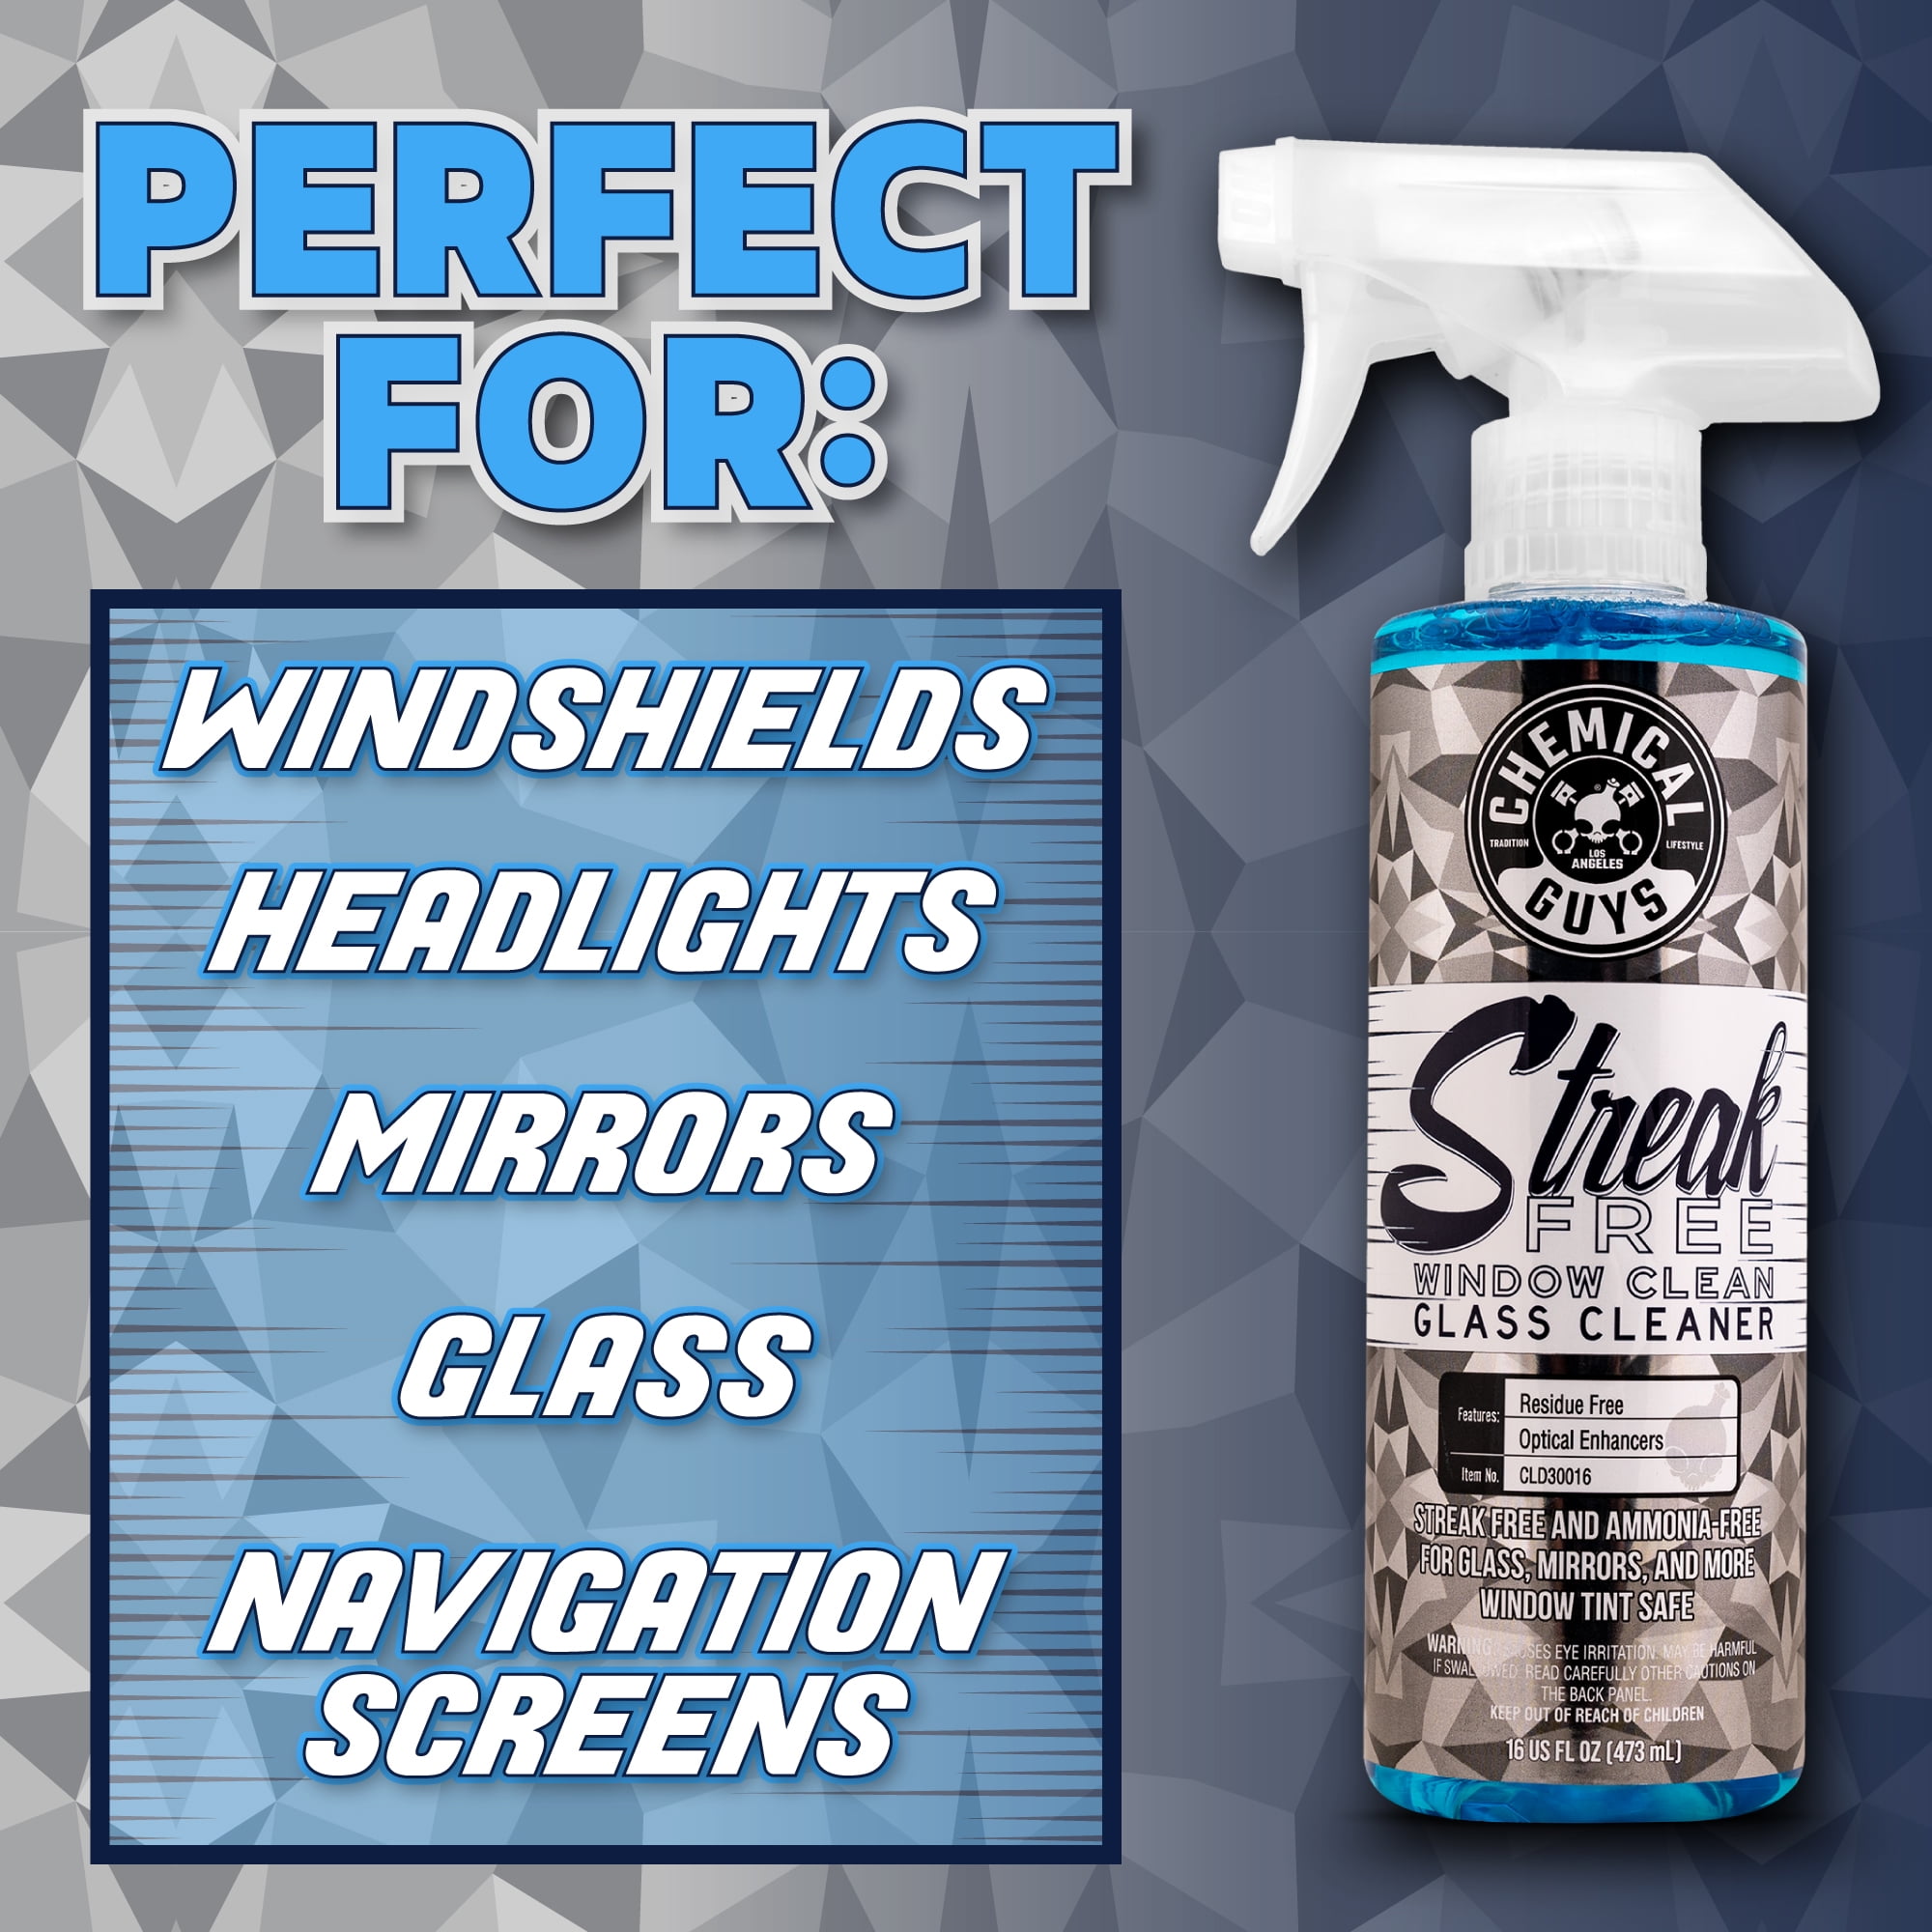  Ammonia-Free Glass Cleaner by Chemical Guys - For